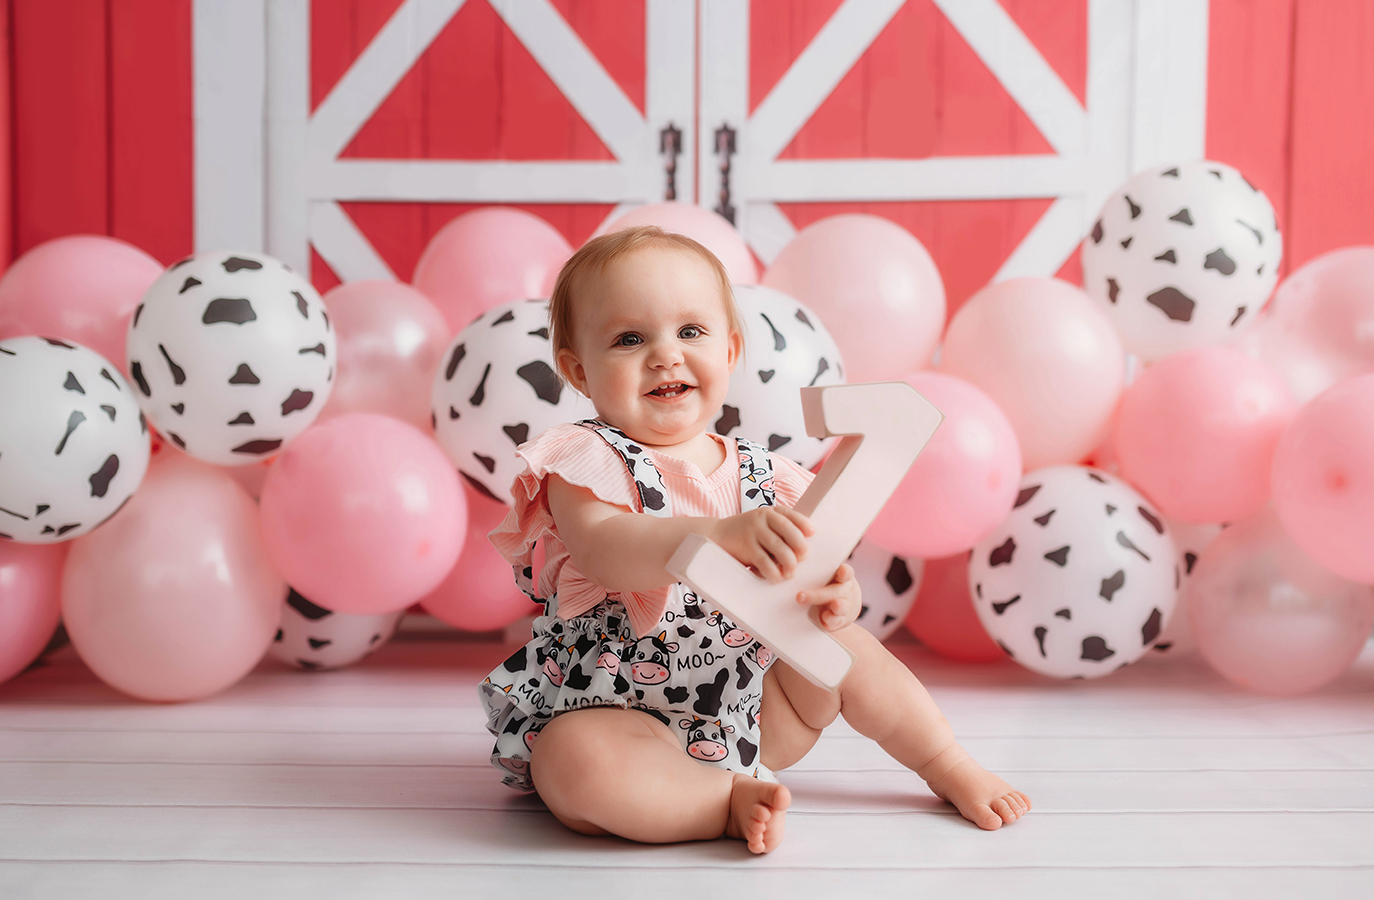 Baby celebrates first birthday with a cake smash photoshoot in Asheville, NC baby photo studio.